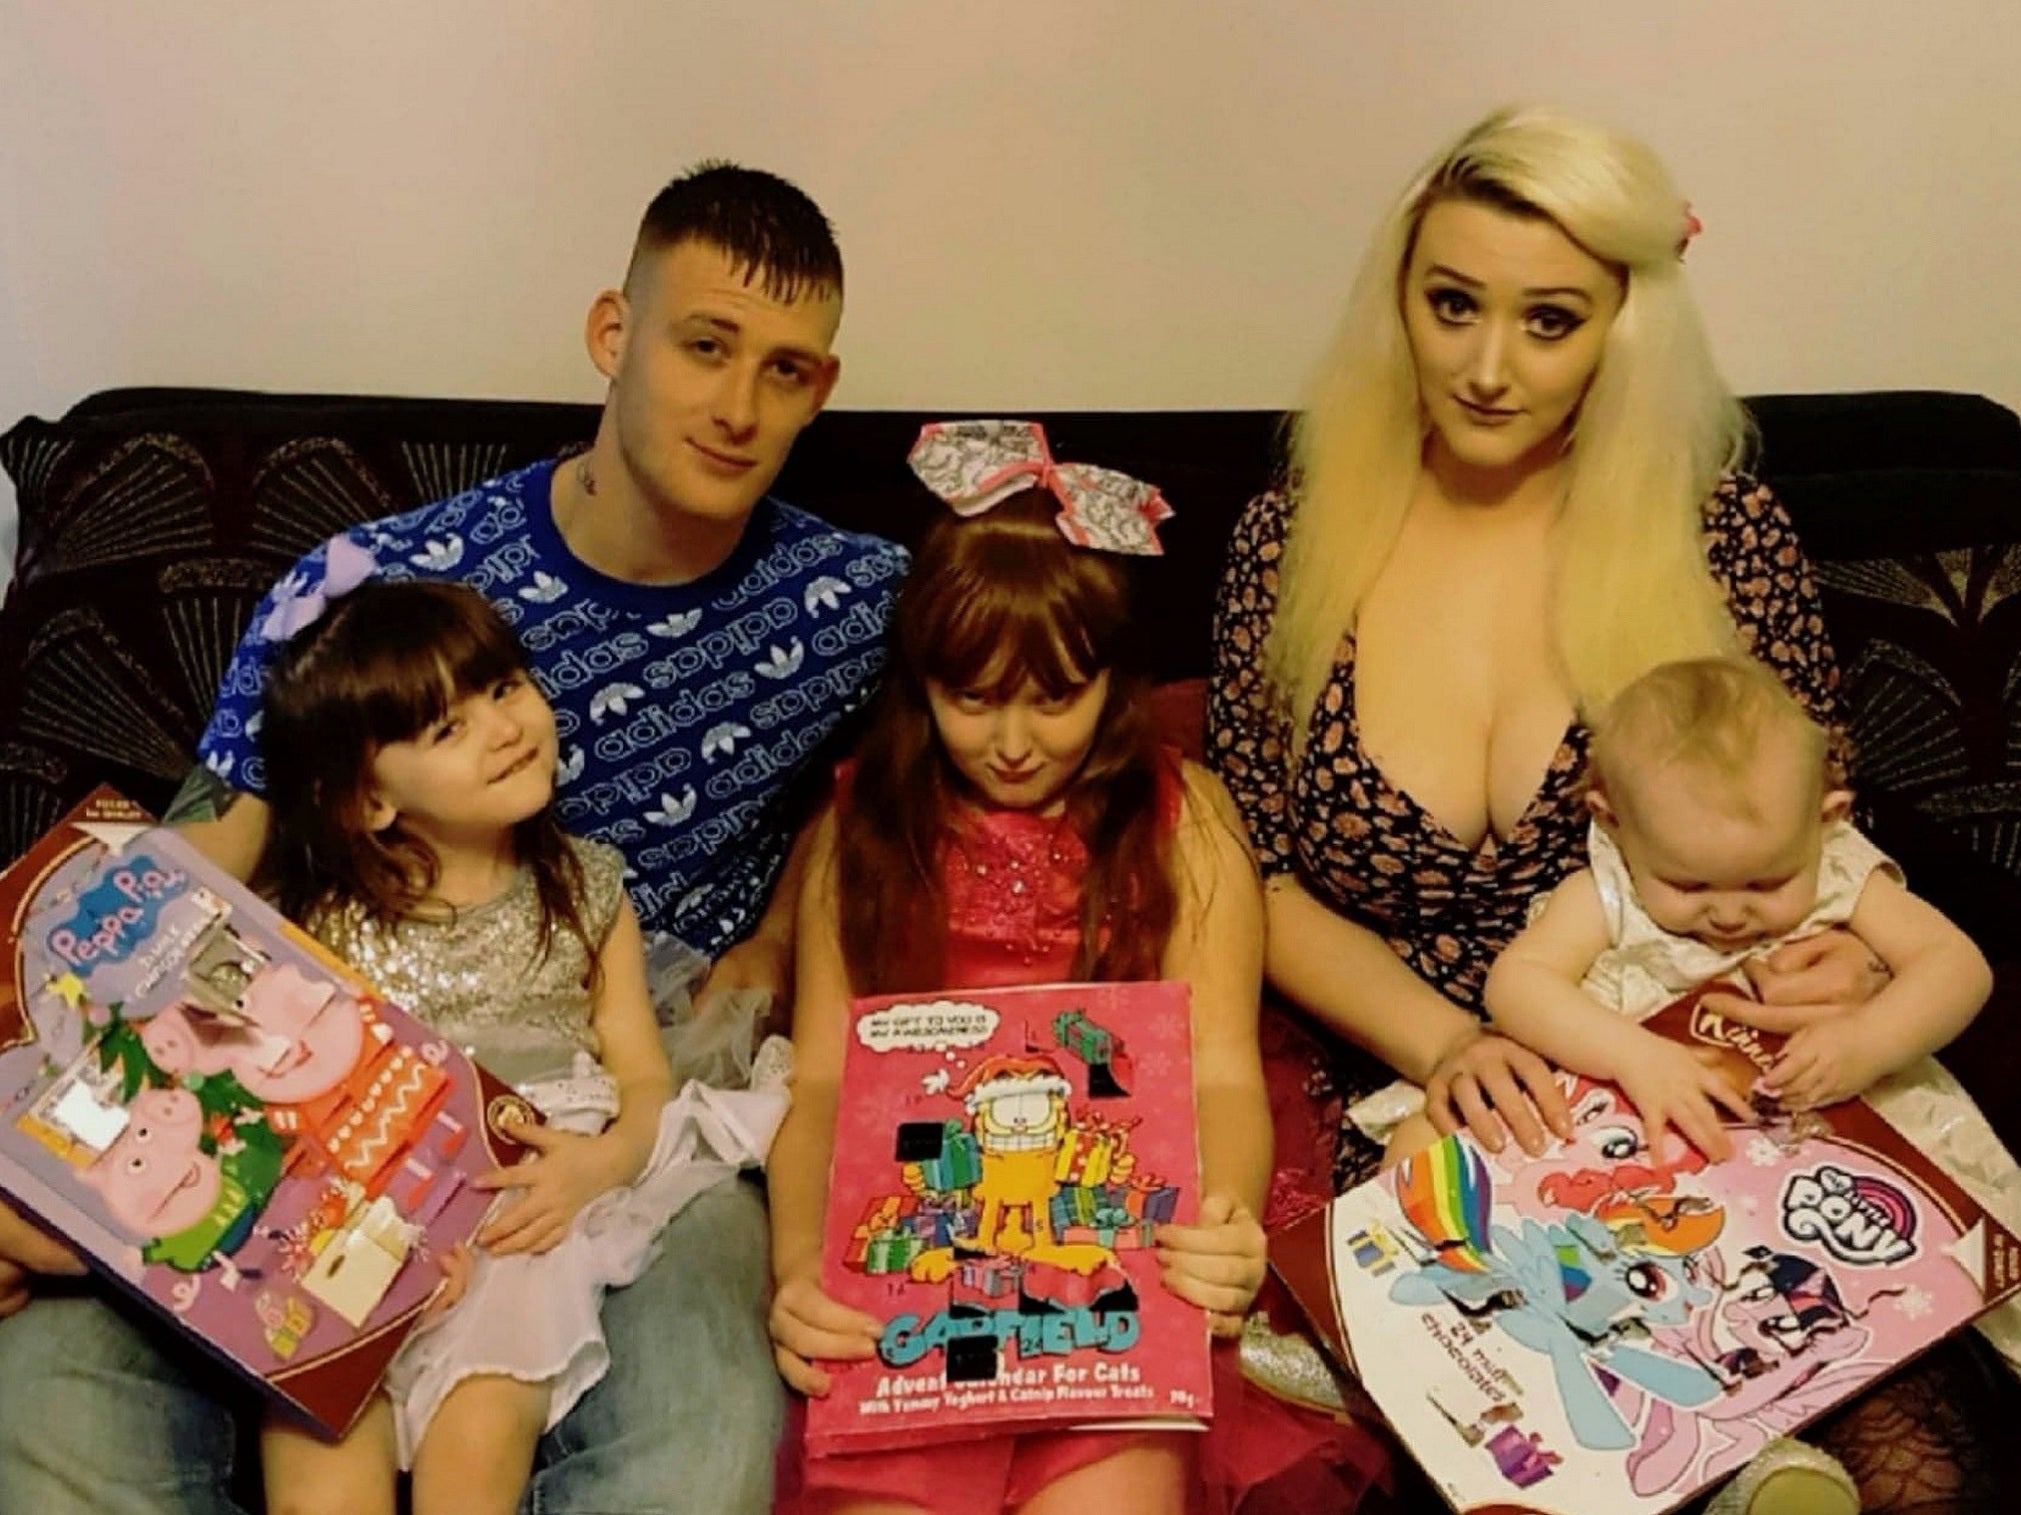 Jess Evans, 26, was shocked to discover a £1.99 Garfield advent calendar she bought from B&amp;M in Oswestry, Shropshire, for her nine-year-old daughter Alissa was in fact for cats and contained yoghurt and catnip treats. Pictured L-R: Alexis Davies-Evans, Sean Davies, Alissa Evans, Jess Evans, Aurora Davies-Evans